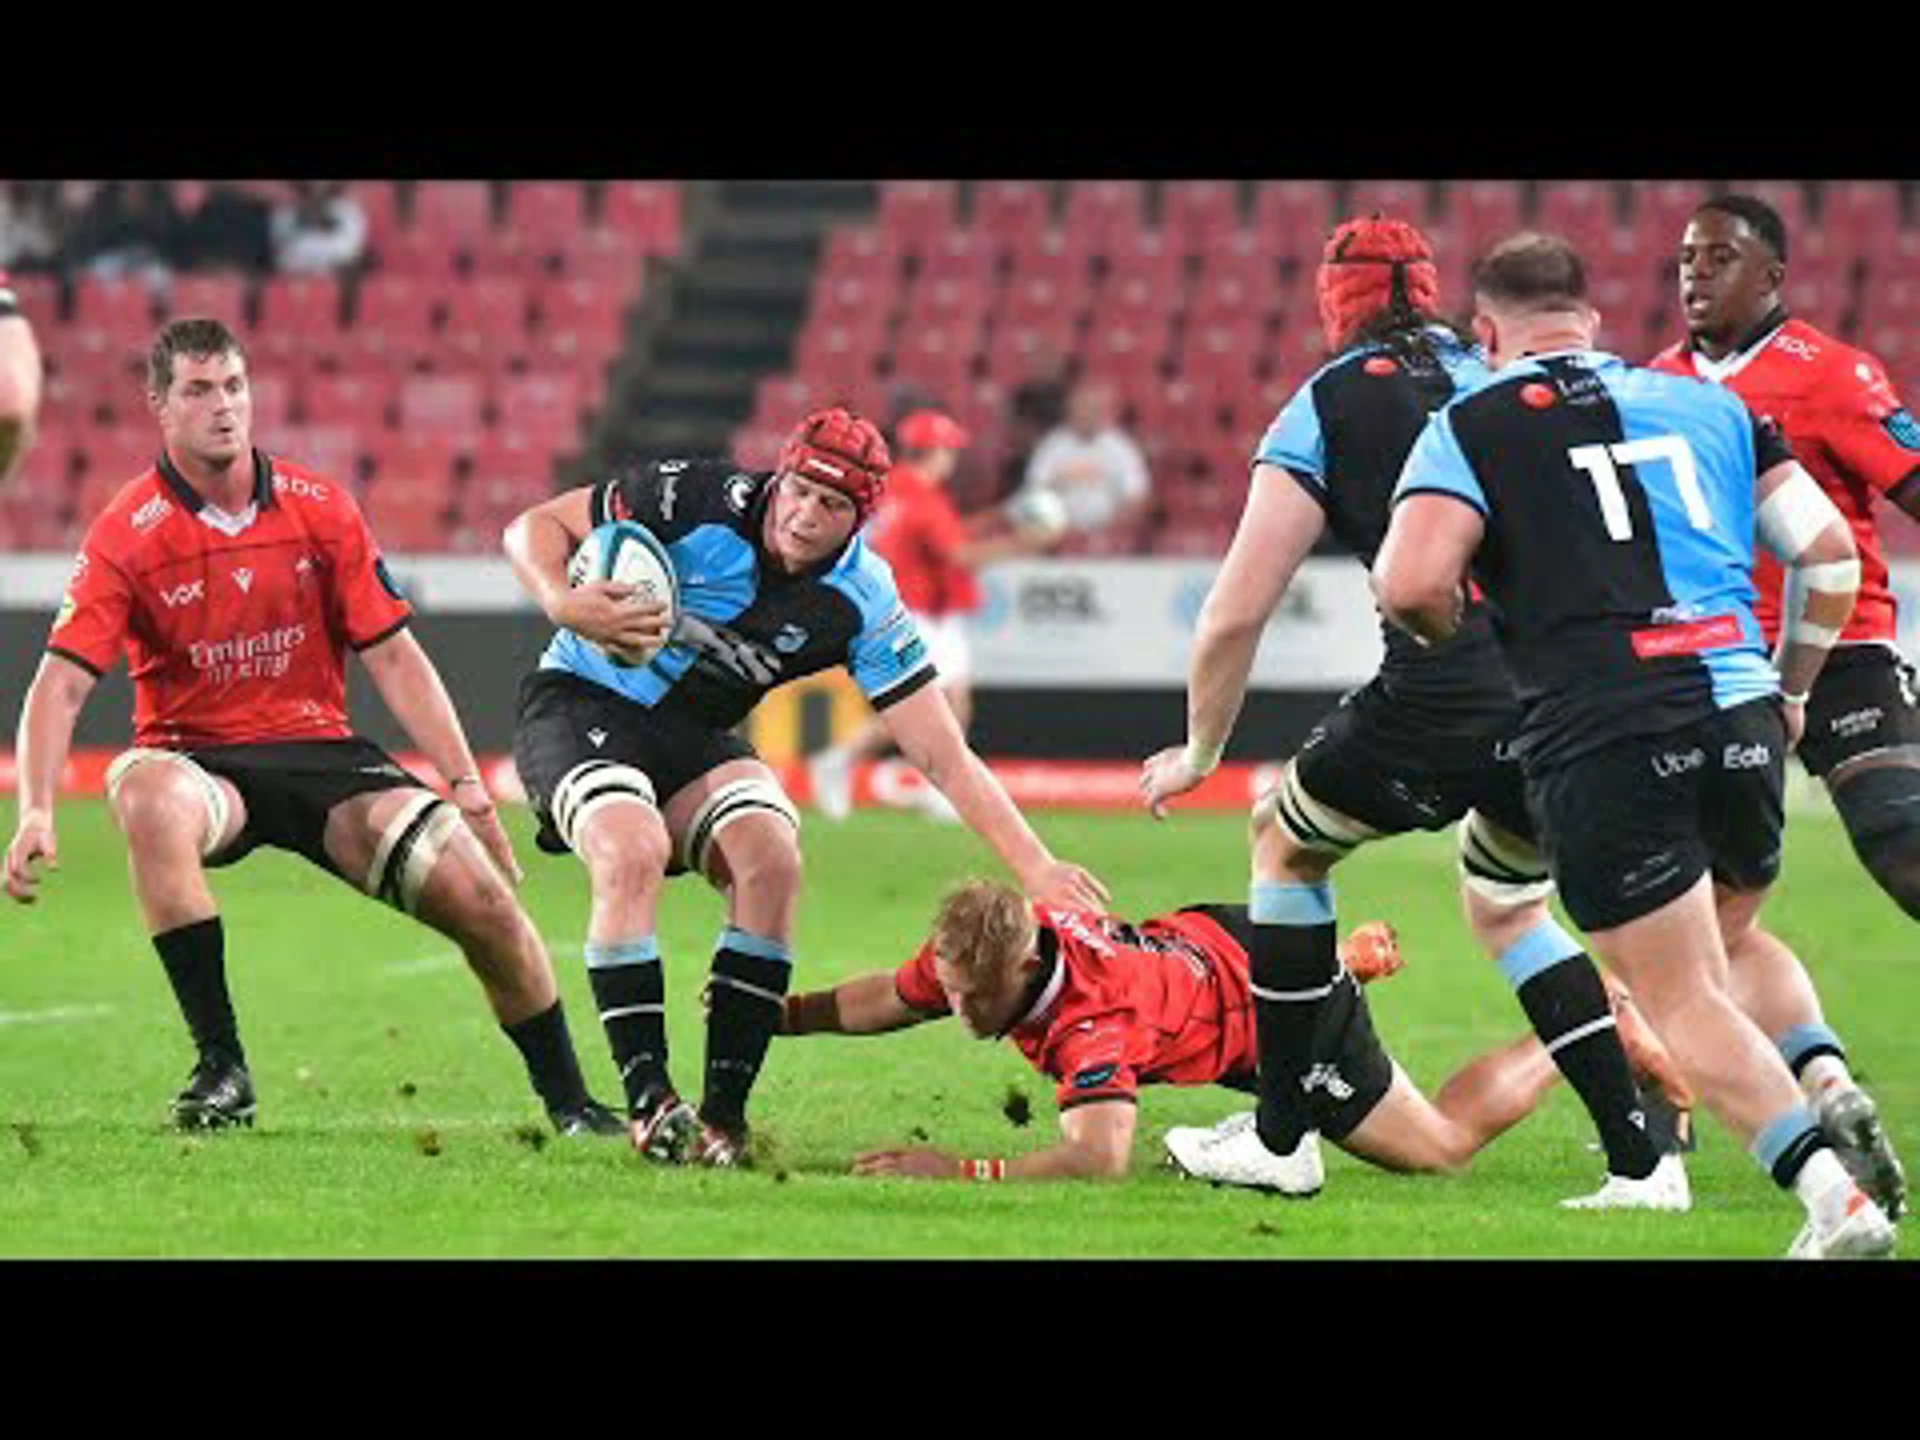 Emirates Lions v Cardiff | Match Highlights | Vodacom United Rugby Championship